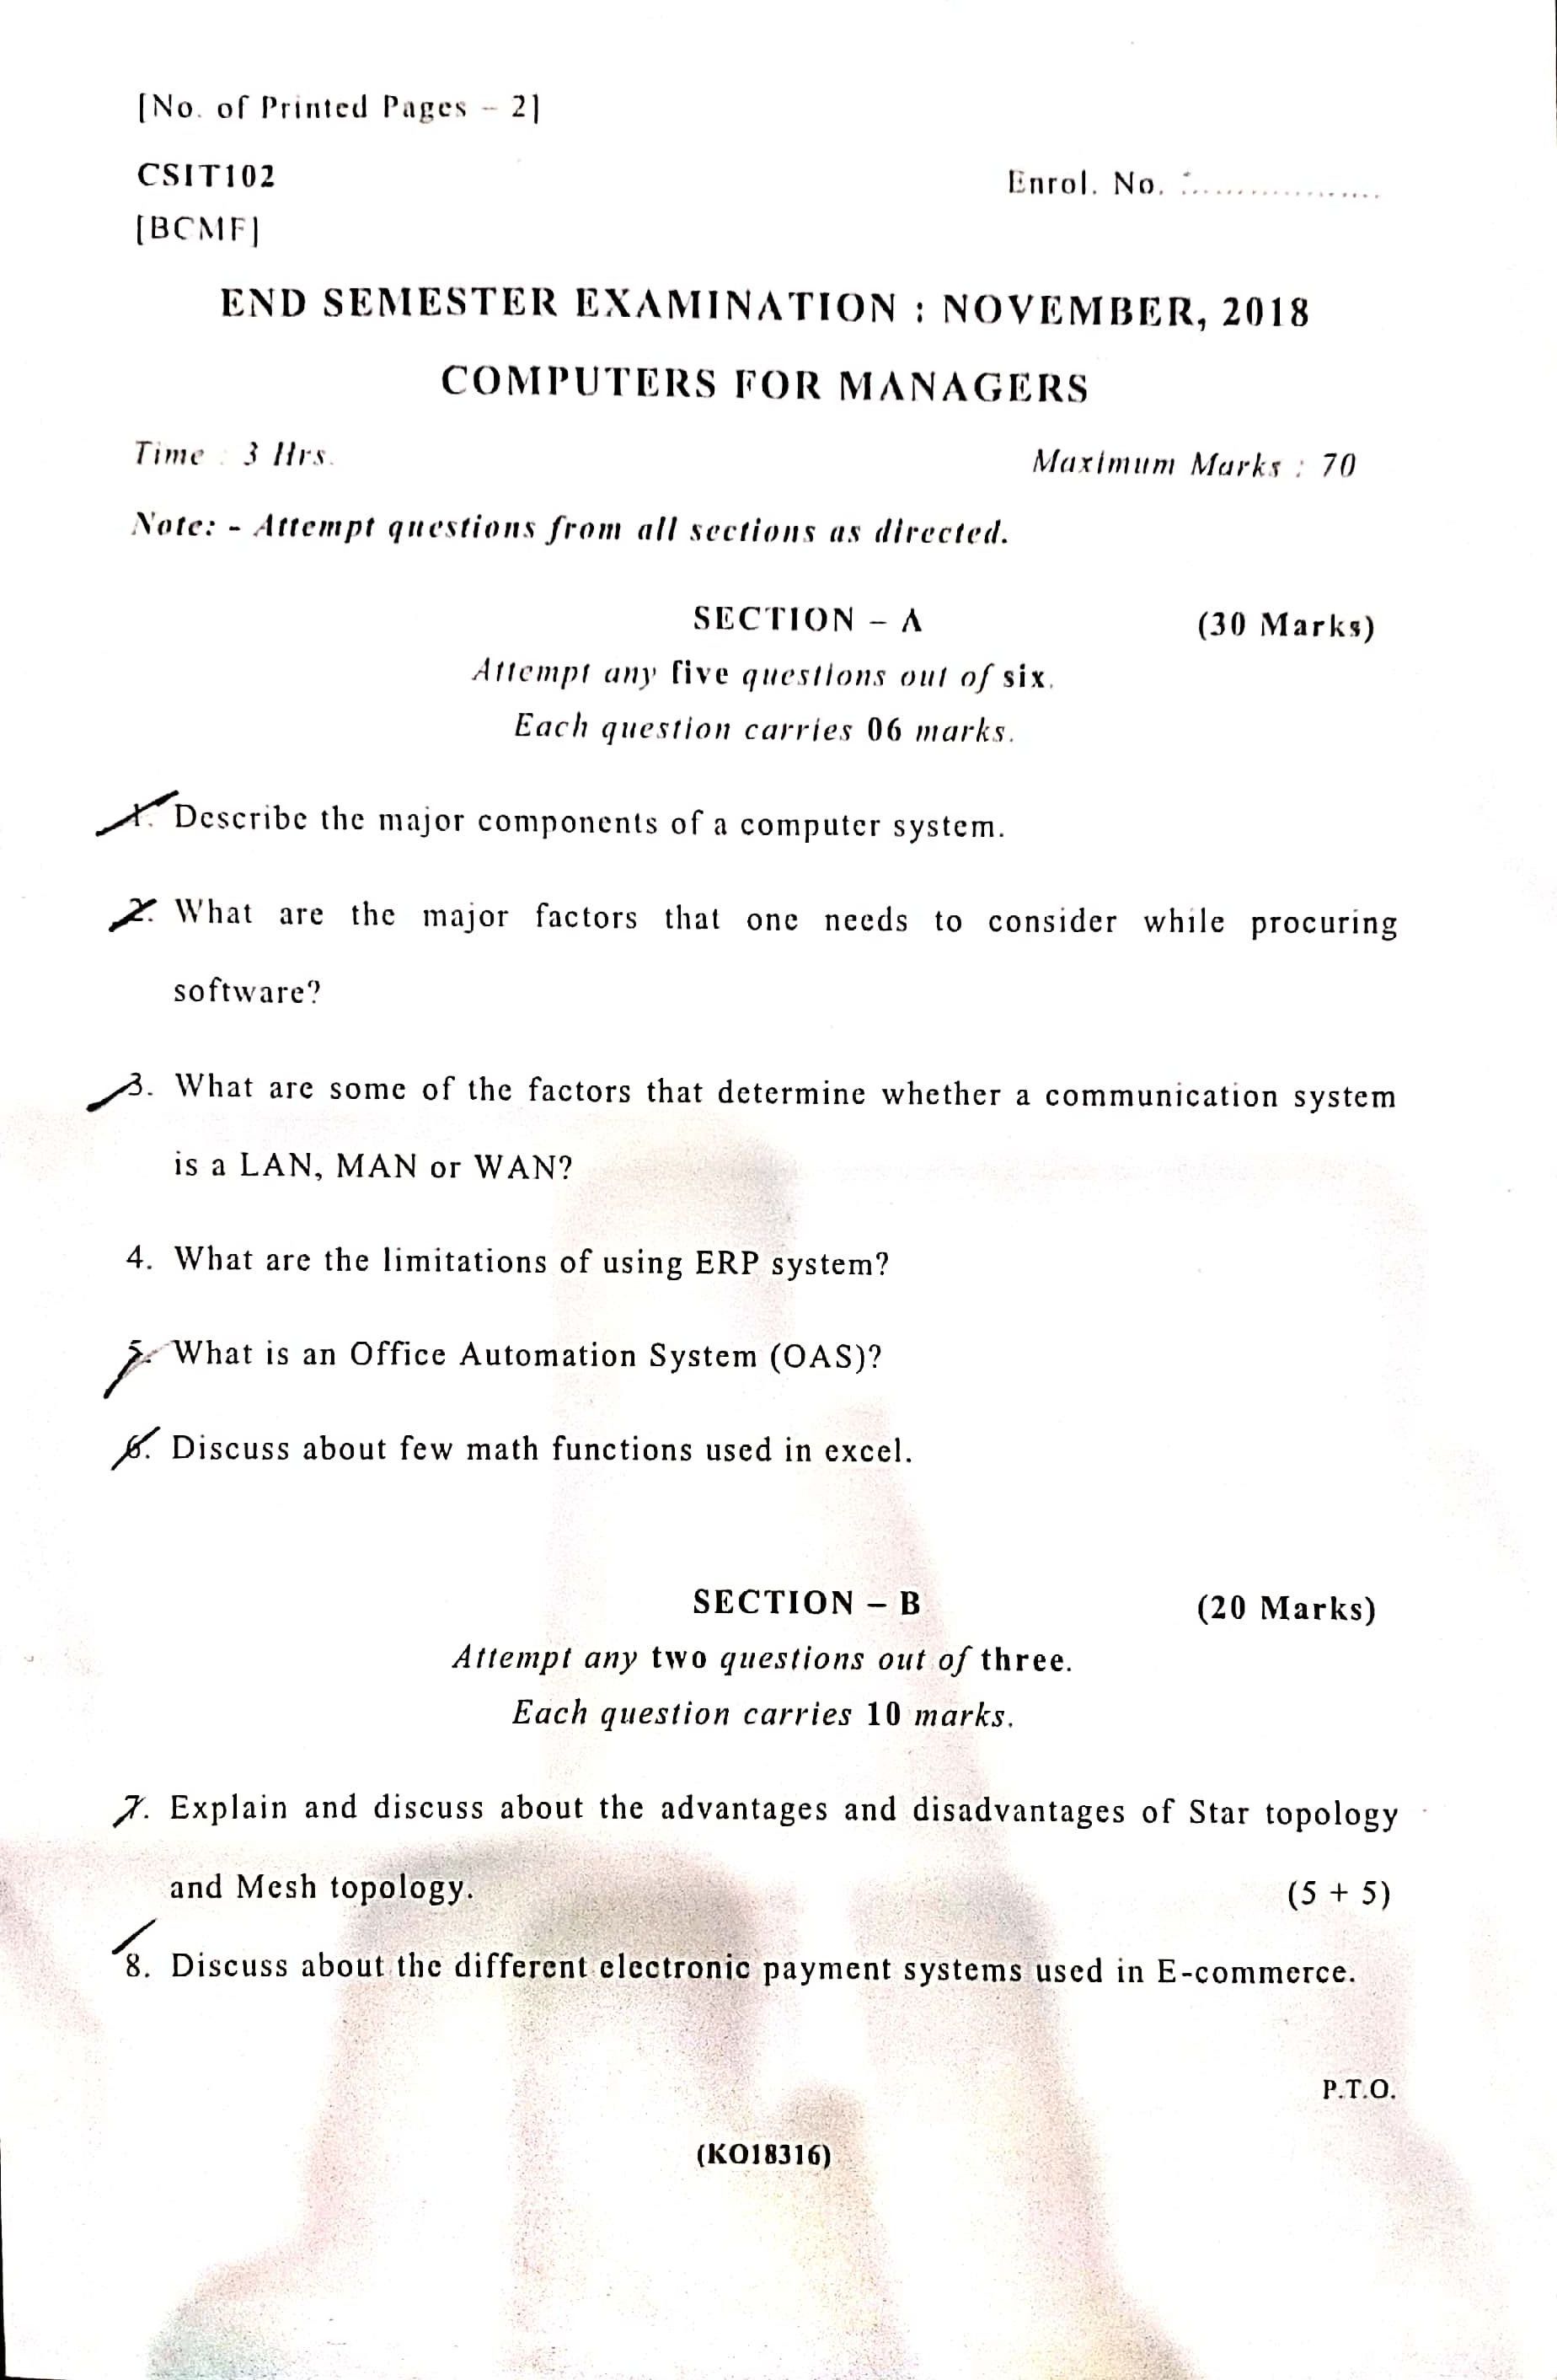 Computers For Managers Question Paper-Computer for managers_1.jpg